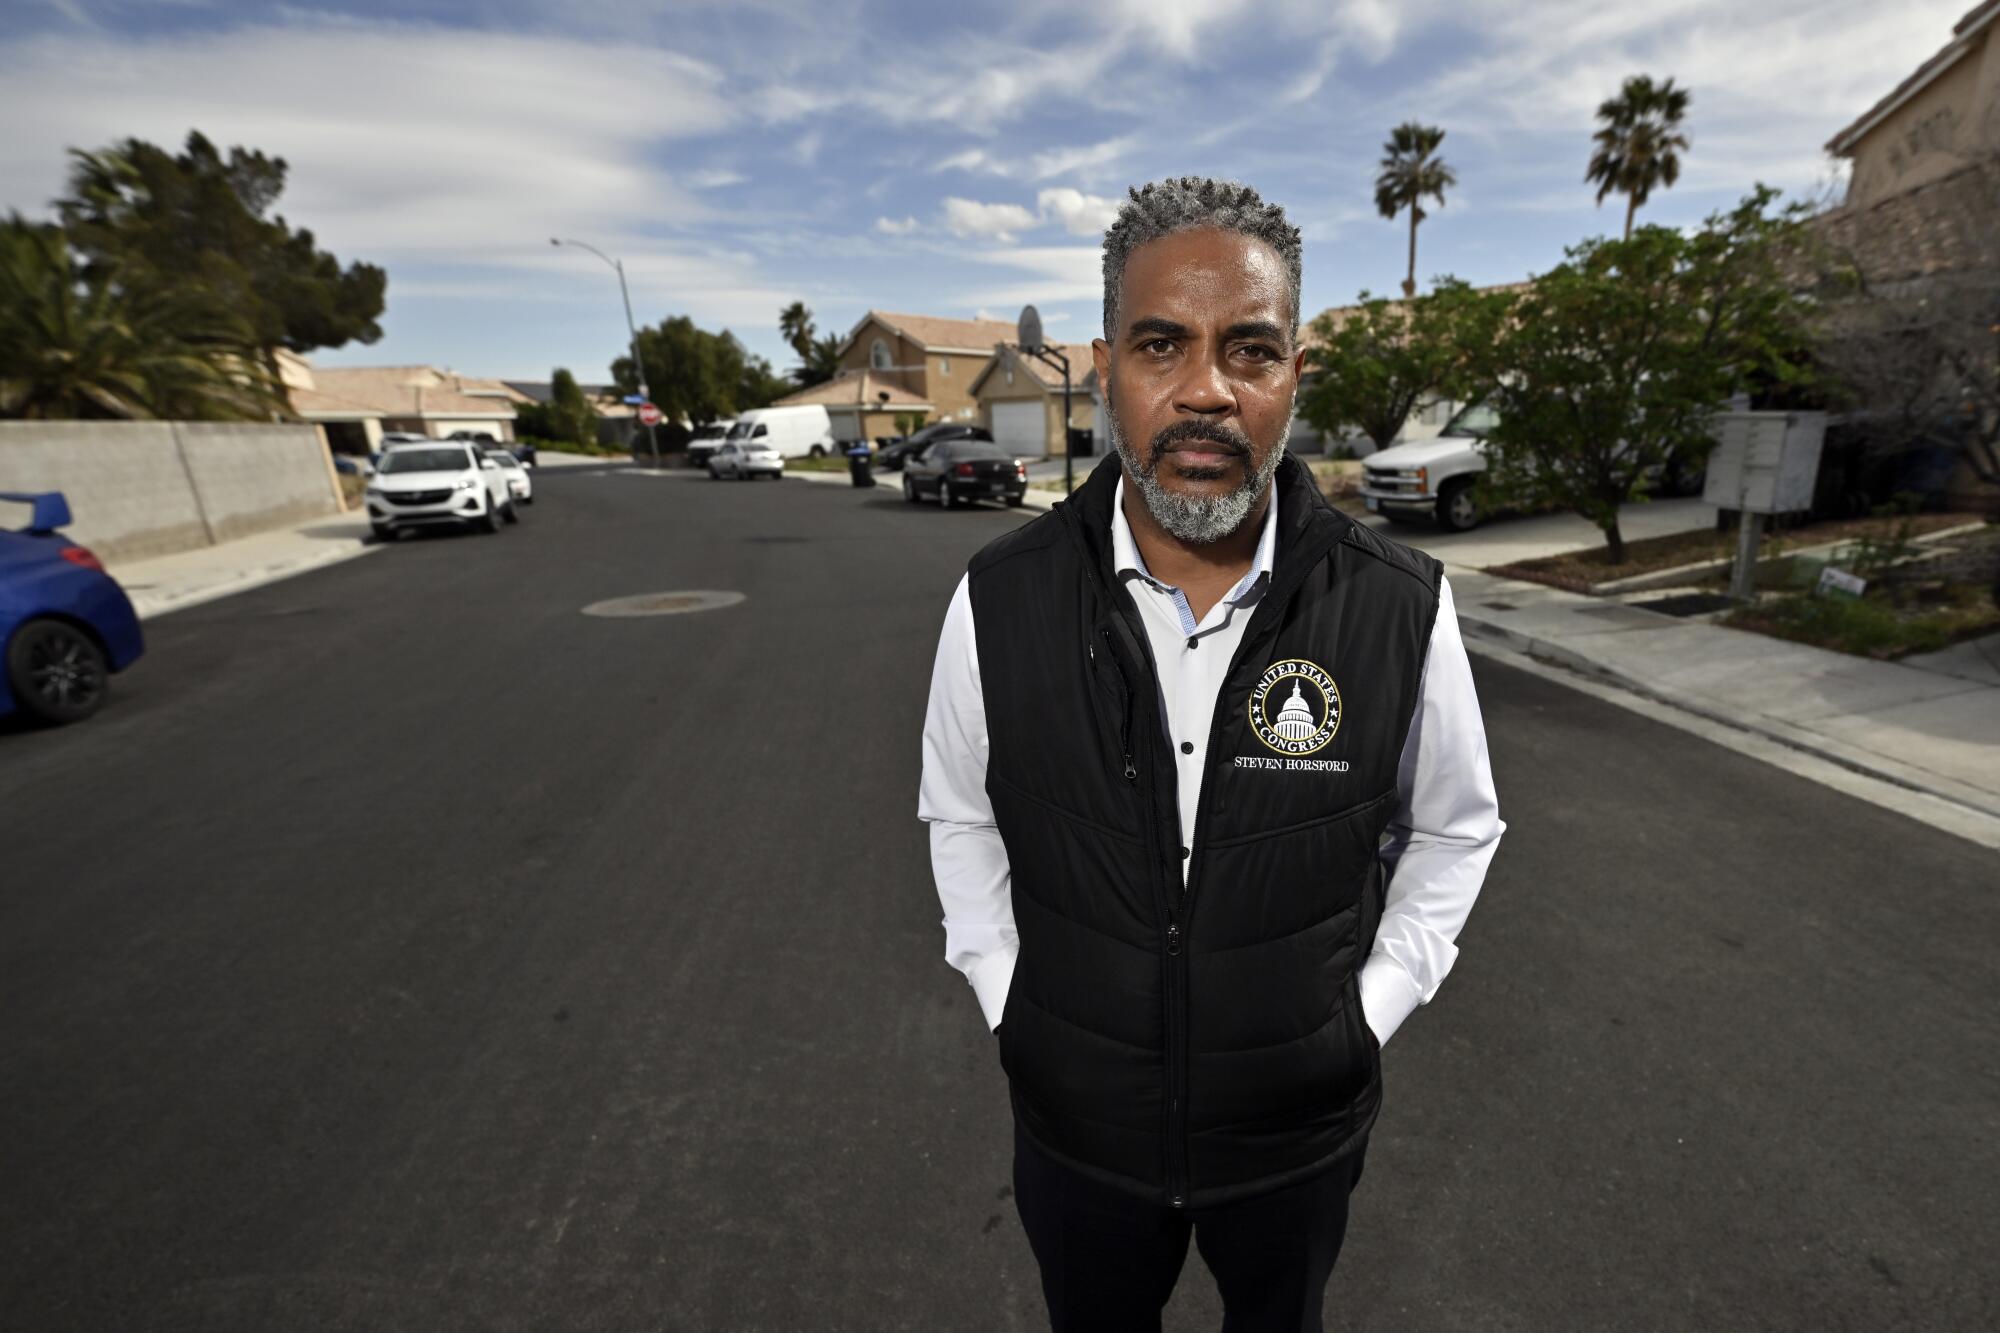 Rep. Steven Horsford (D-Nev.) in a North Las Vegas neighborhood in his home district.